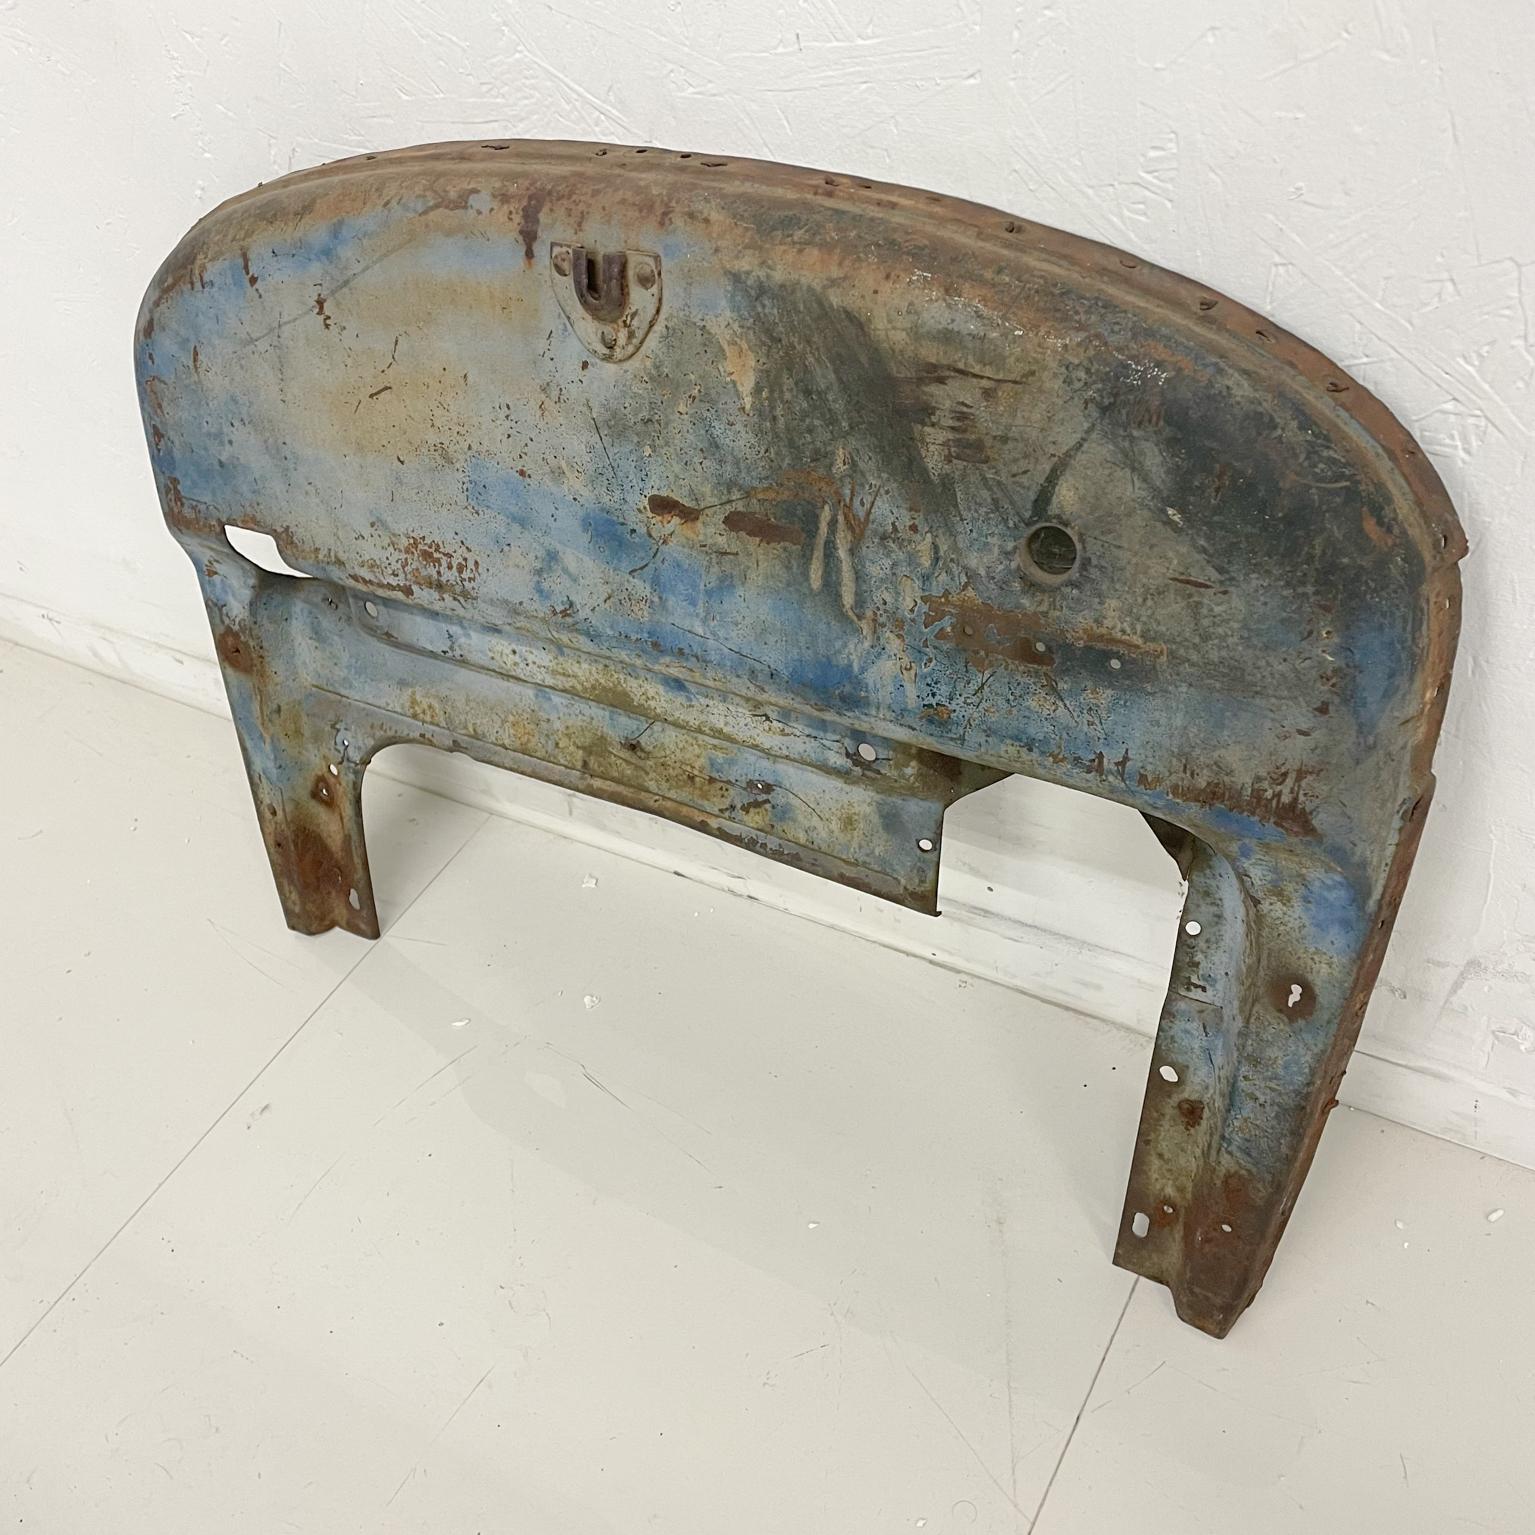 Mid-20th Century Salvaged Art Industrial Blue Beauty Oxidized Metal Piece Tarnished Distress